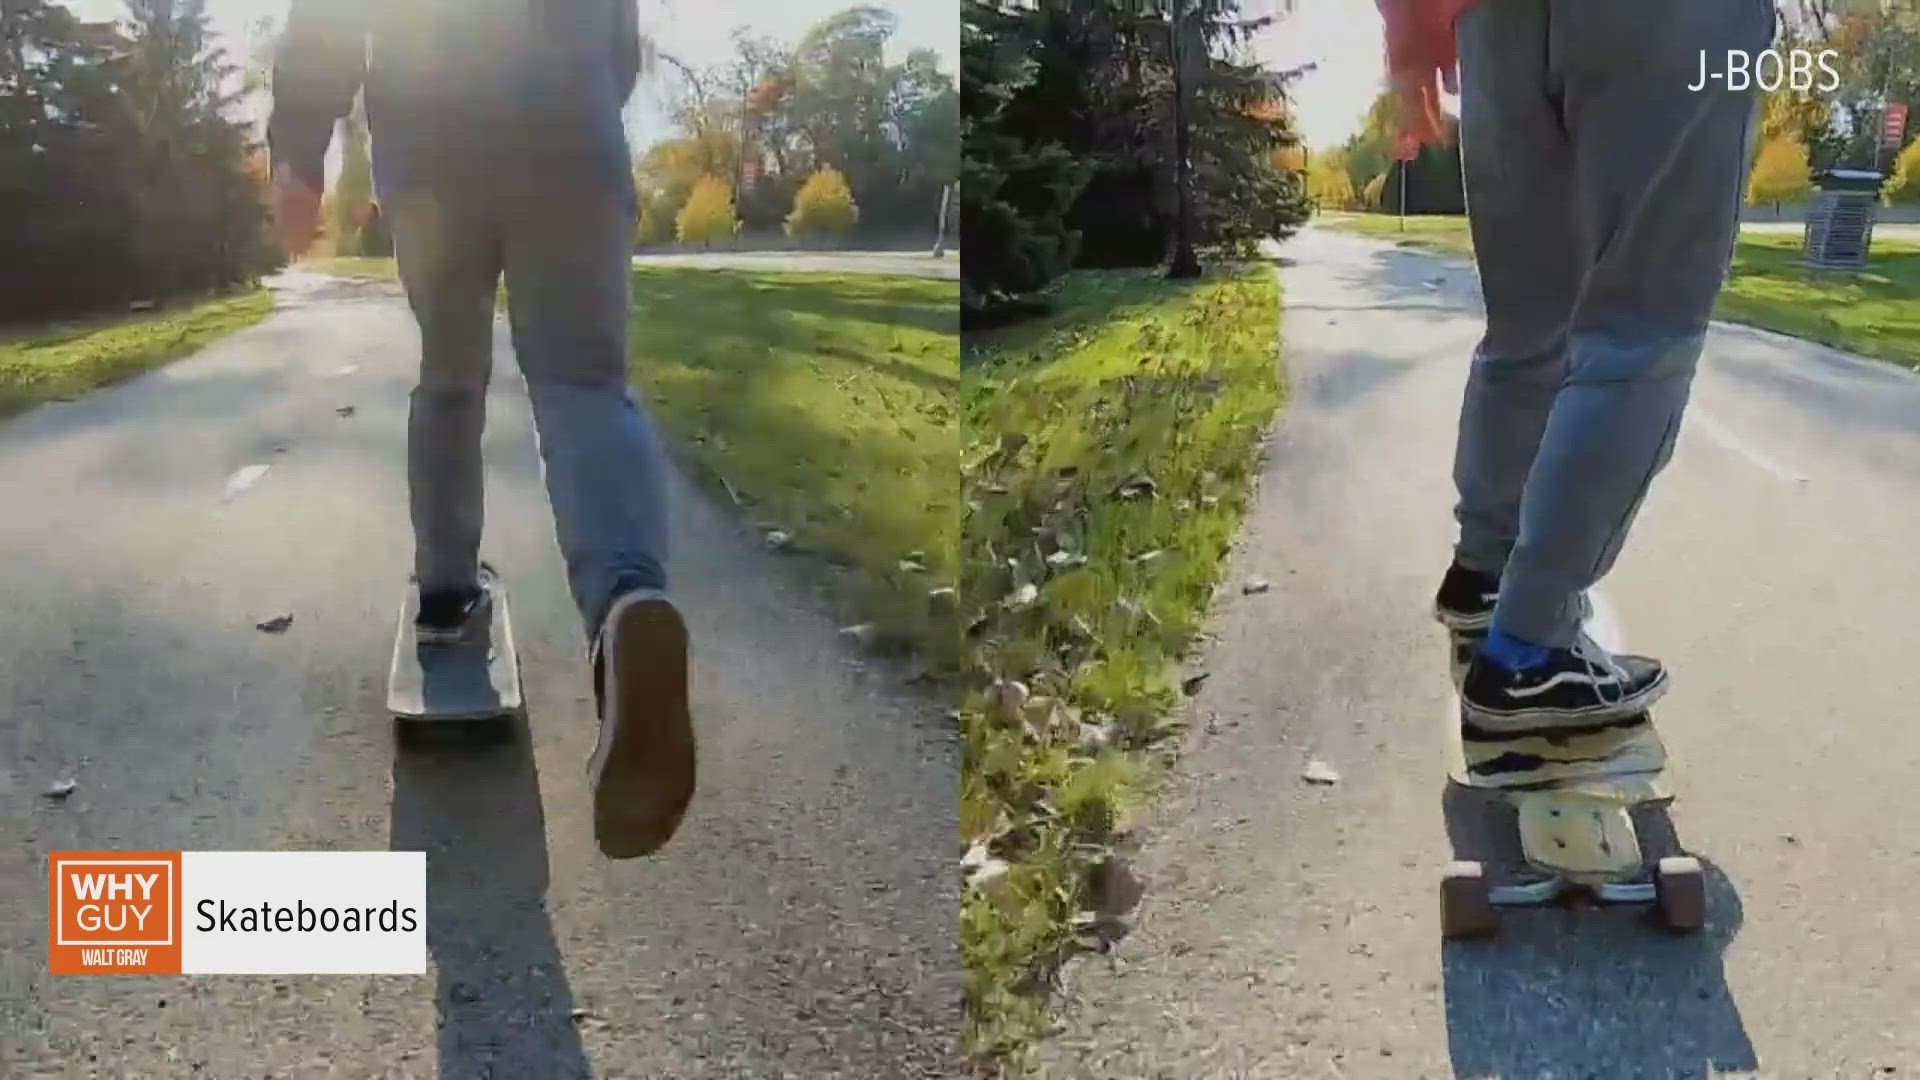 The issue of banning skateboards applies generally to bike trails and bike lanes.